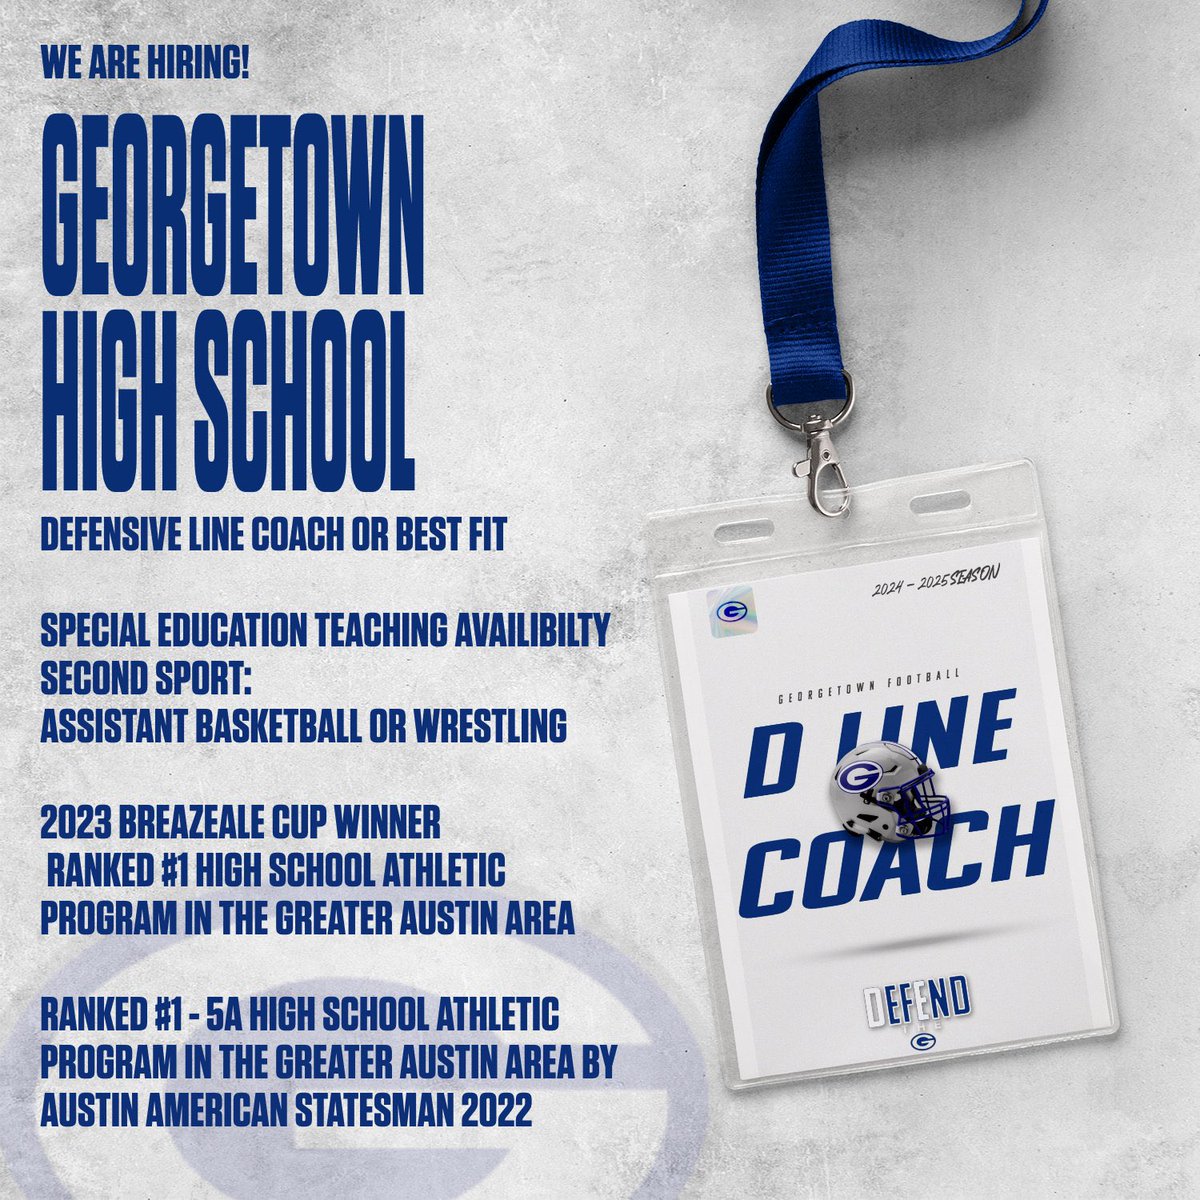 Email griffinc@georgetownisd.org or floresj1@georgetownisd.org if interested!